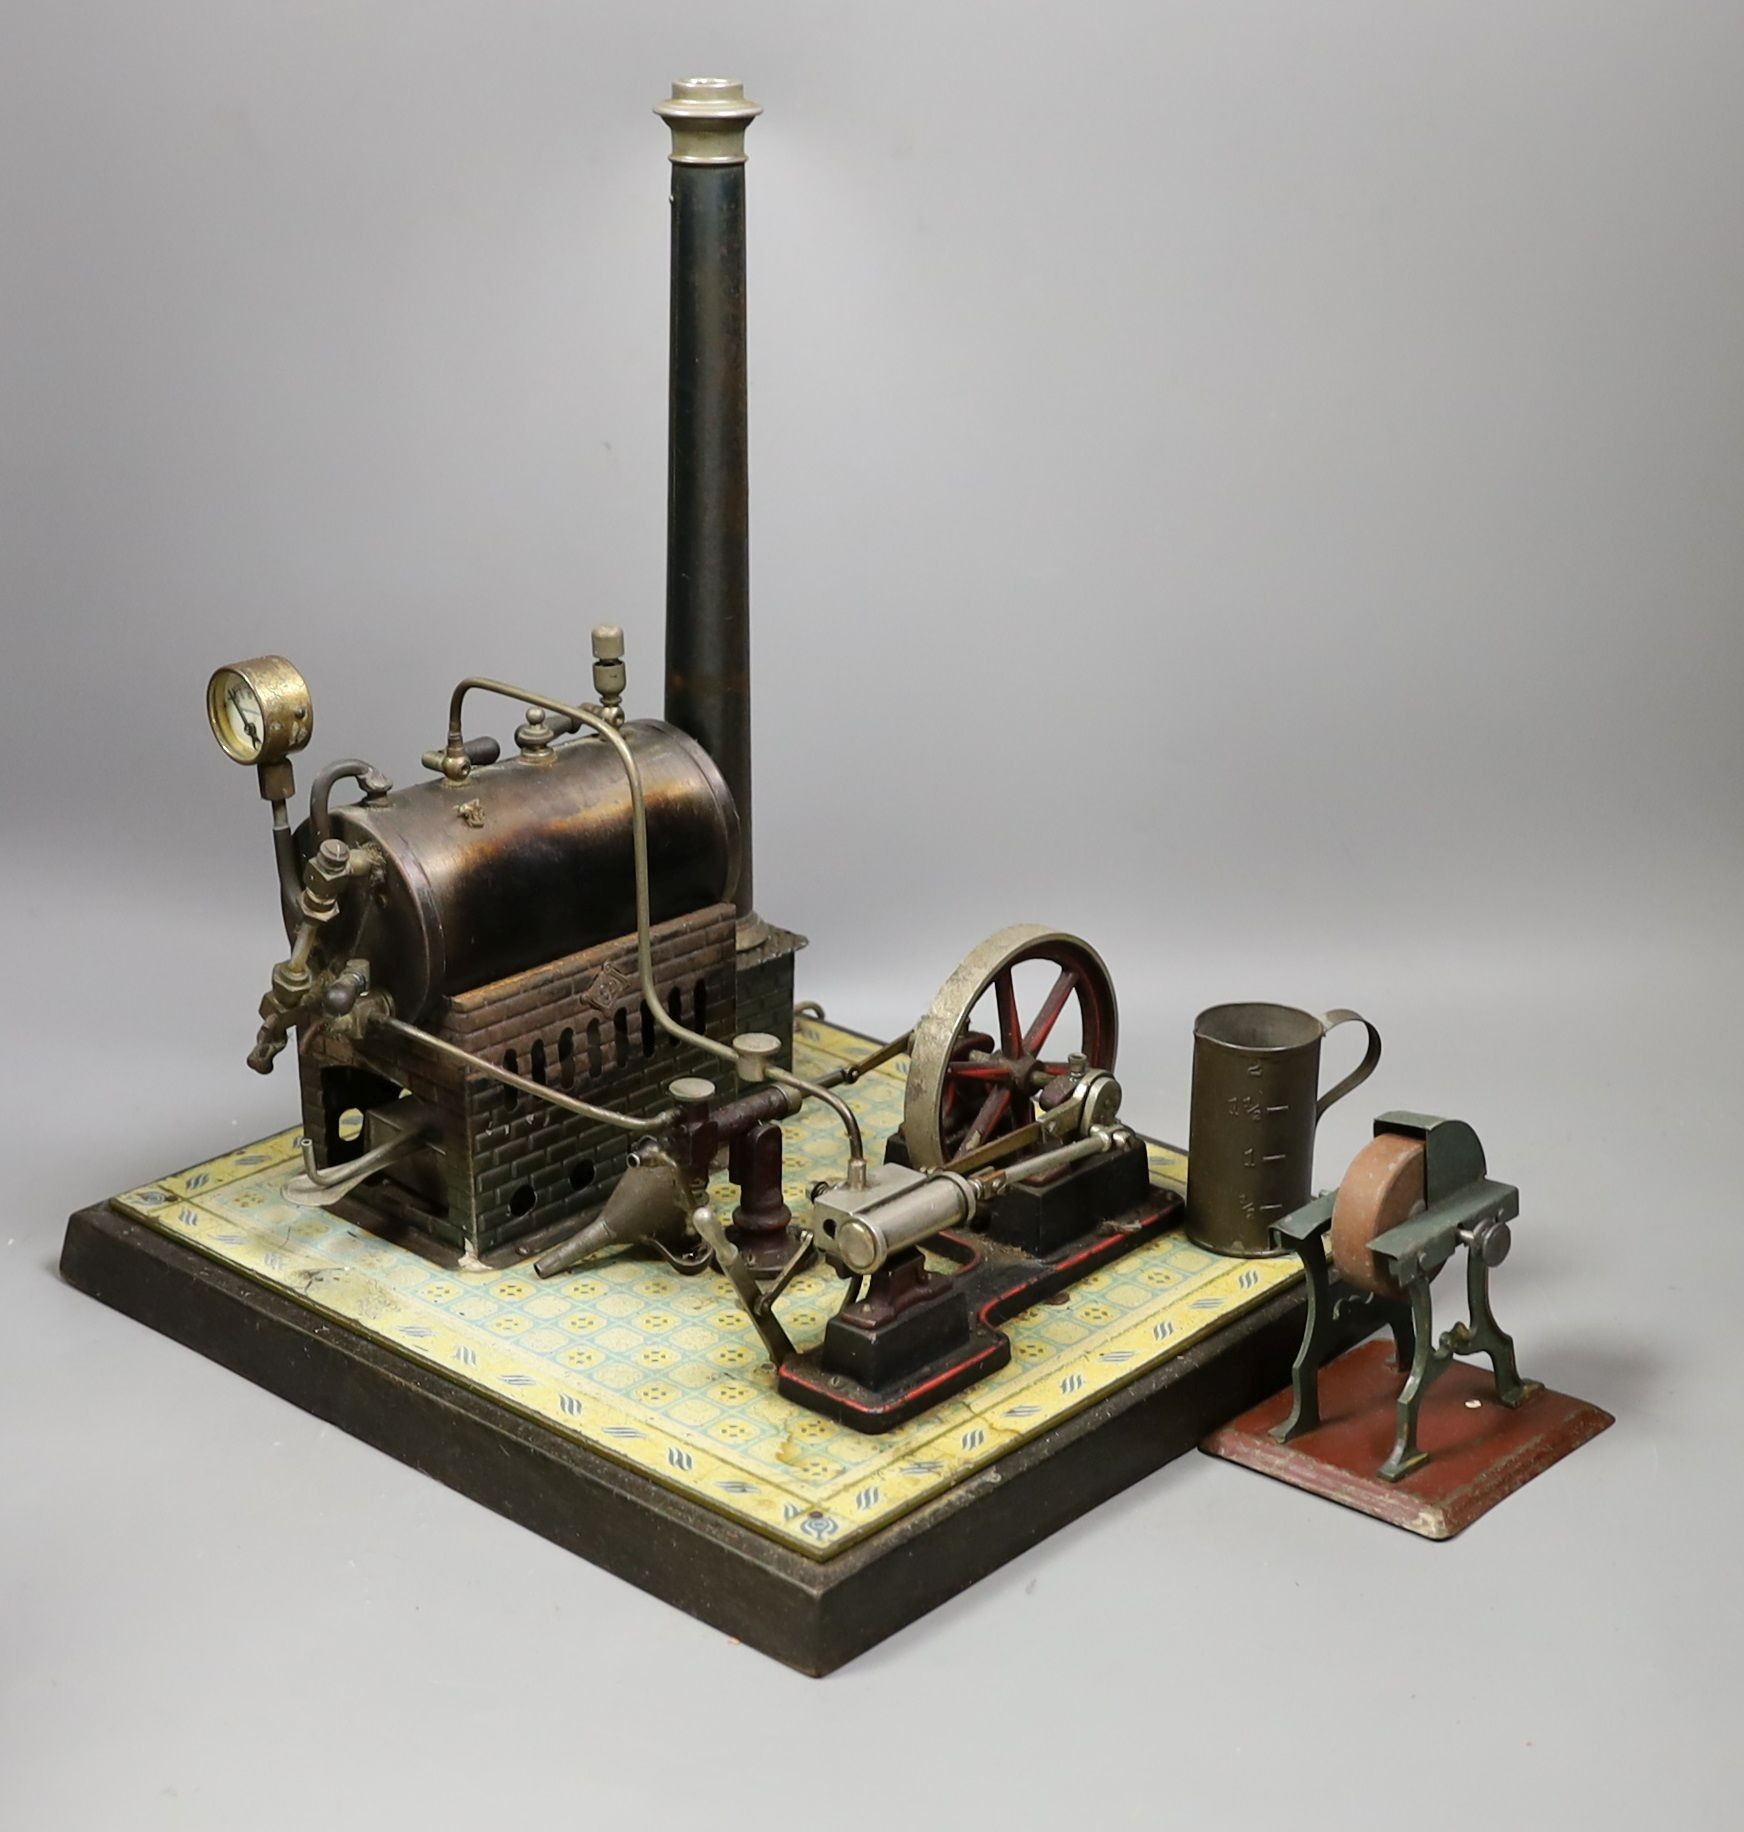 Gebruder Bing - tinplate stationary steam plant, single cylinder, rare, in original pine box, and grindstone accessories, 32cms high, width - 16cm, length - 29cm